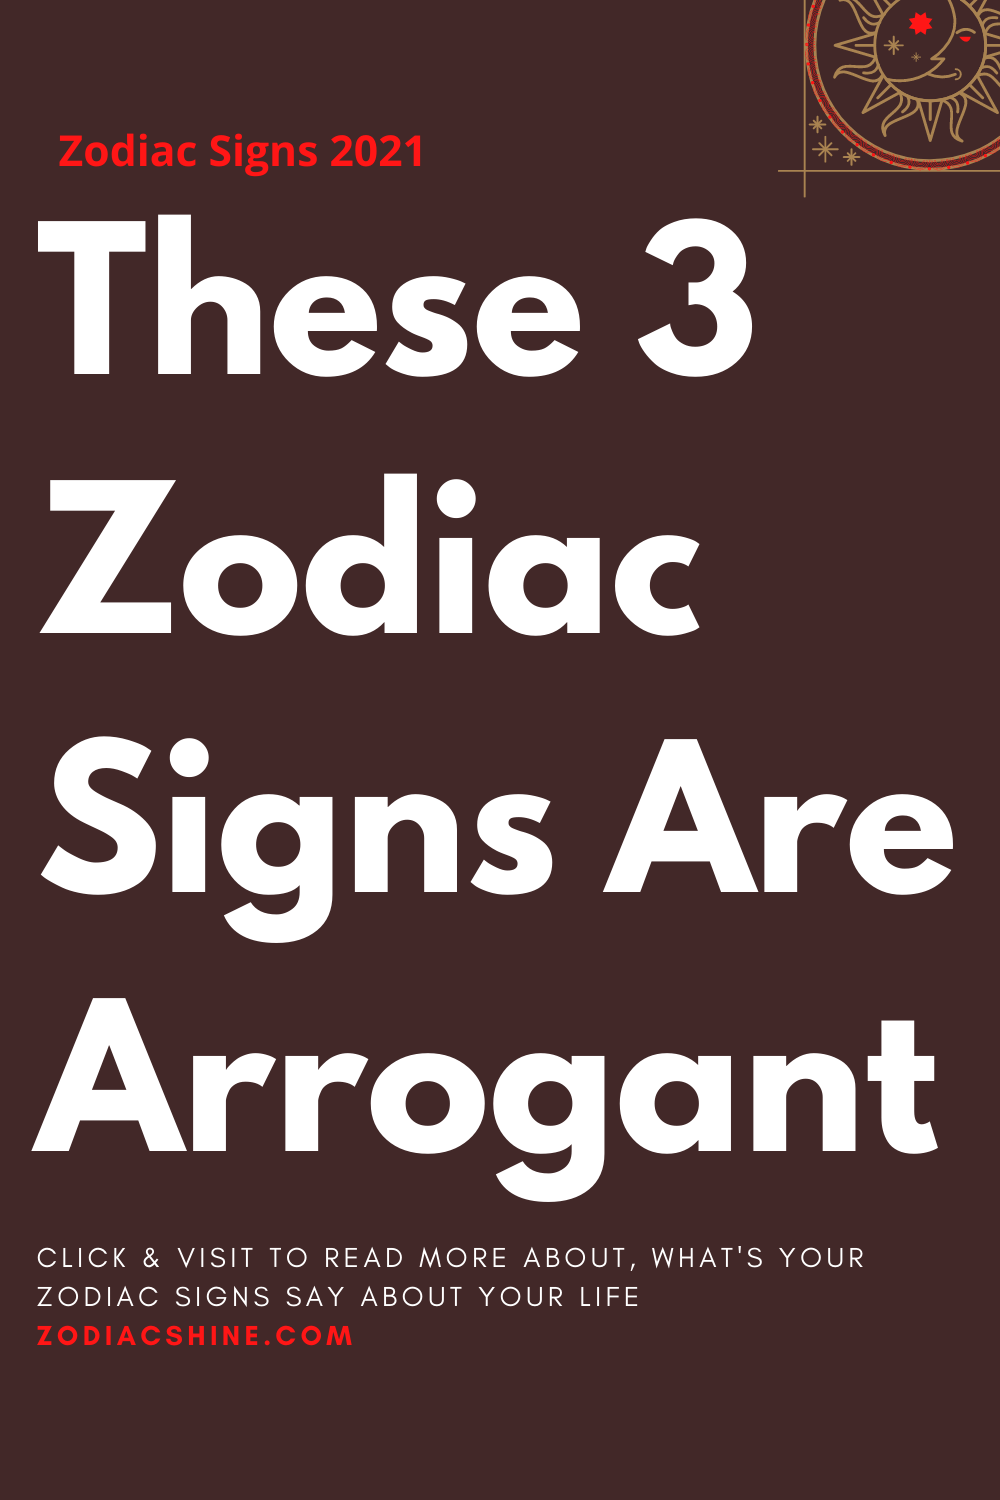 These 3 Zodiac Signs Are Arrogant